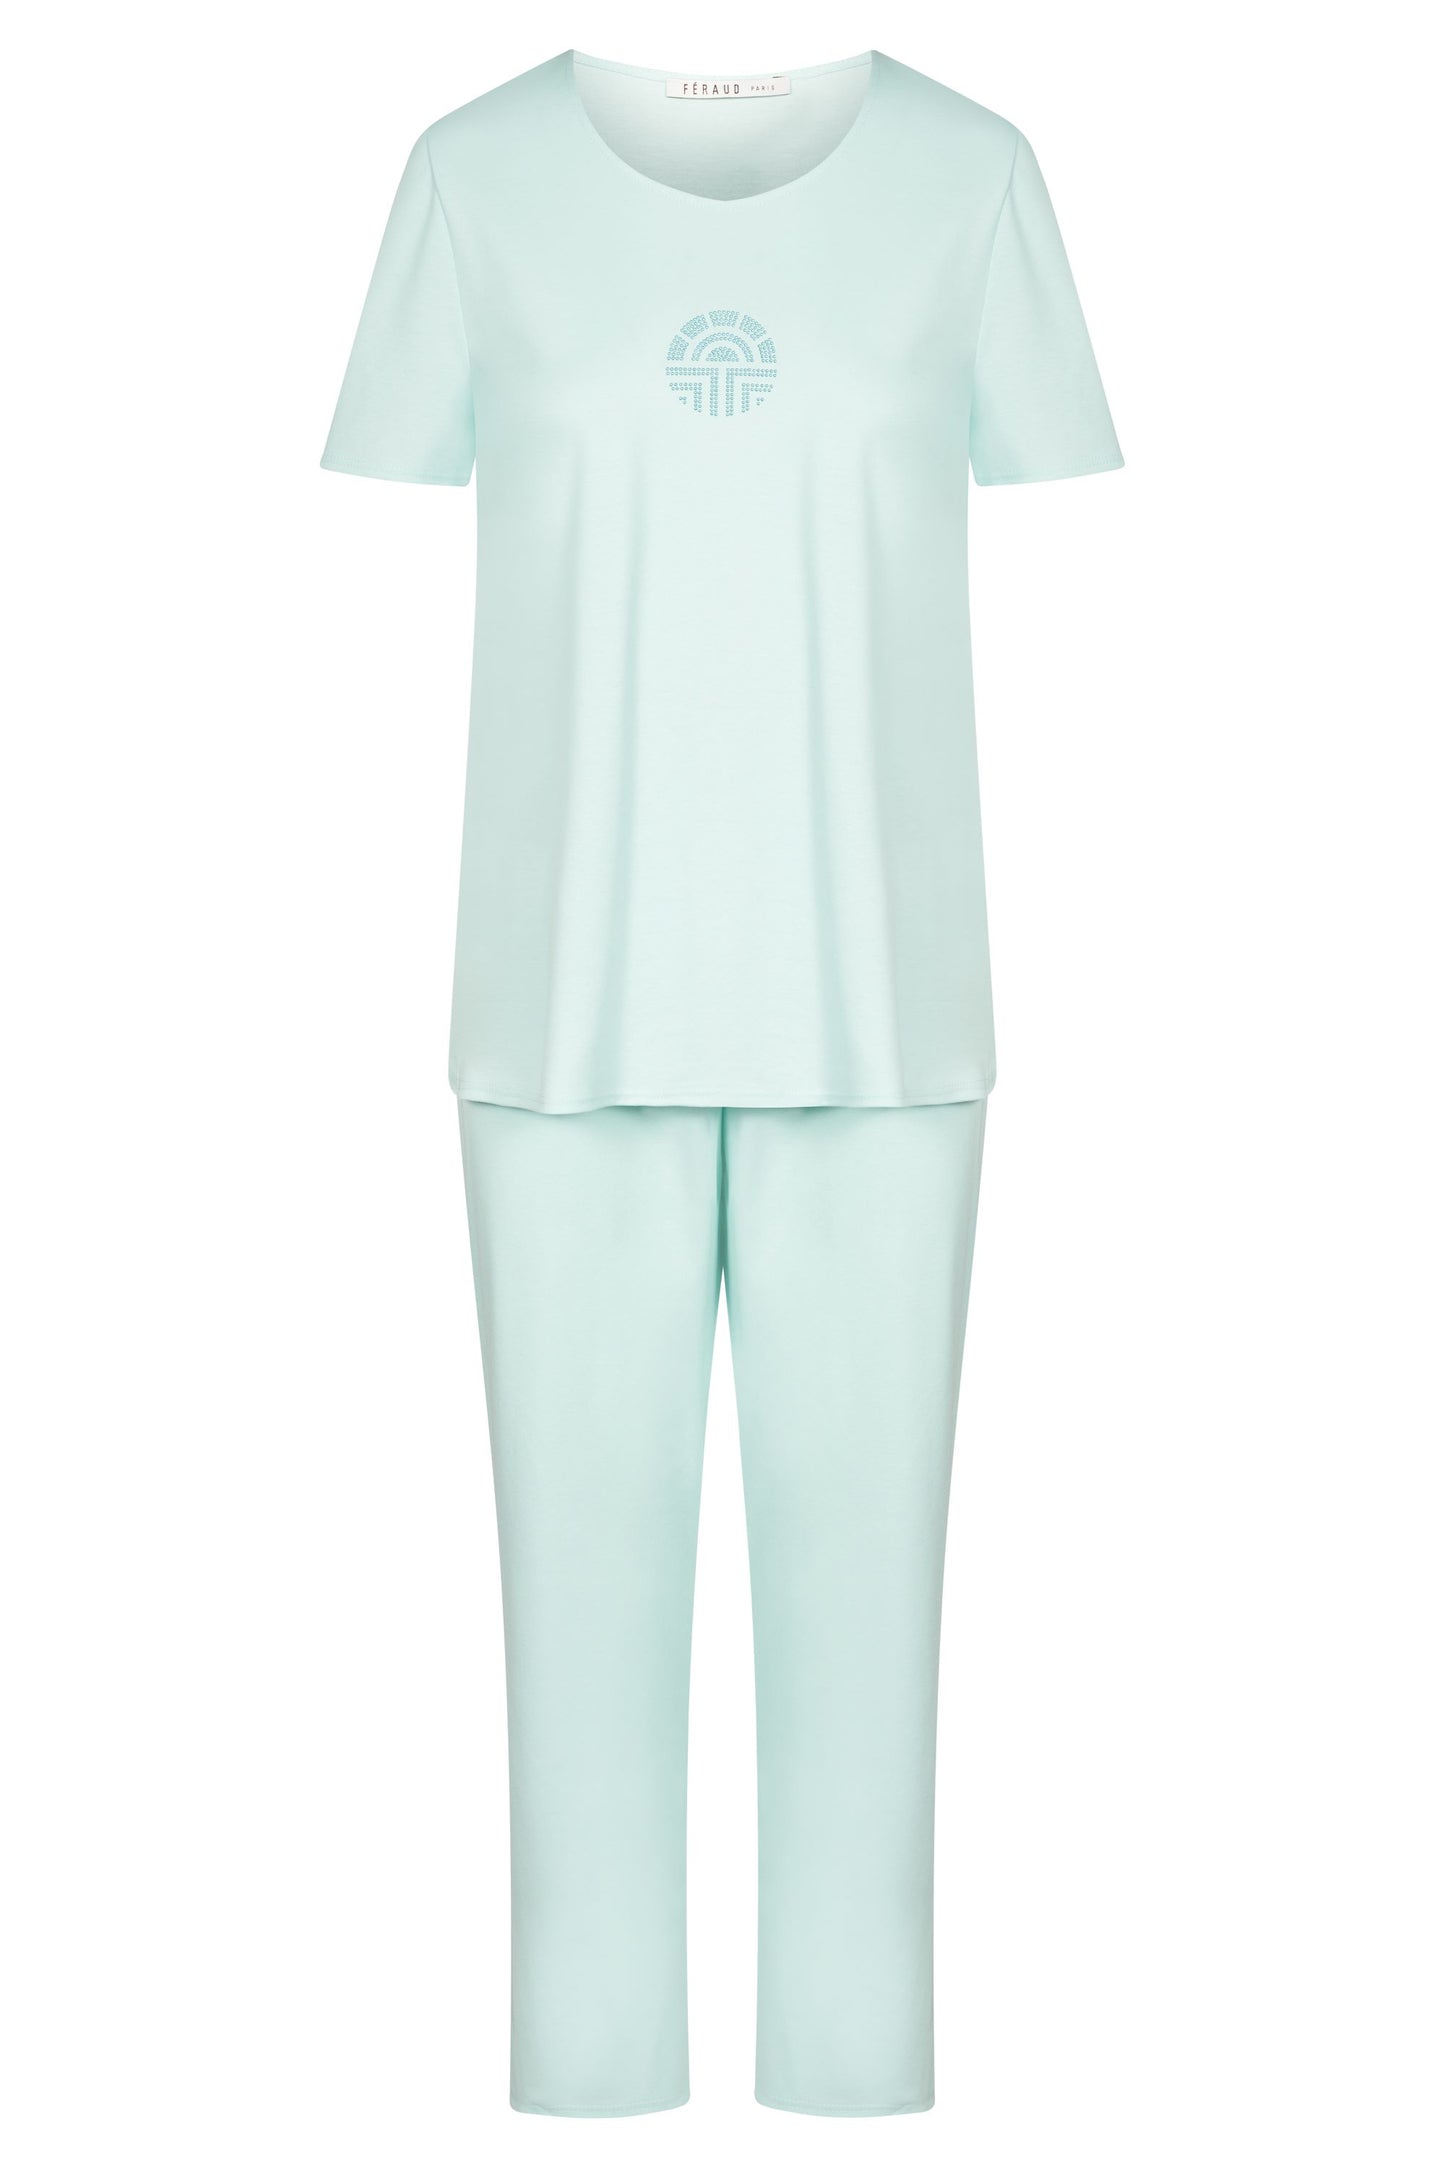 Féraud Paris' High Class line introduces this capri pajama set, crafted from 100% fine interlock cotton and adorned with Féraud logo accents on the top. 